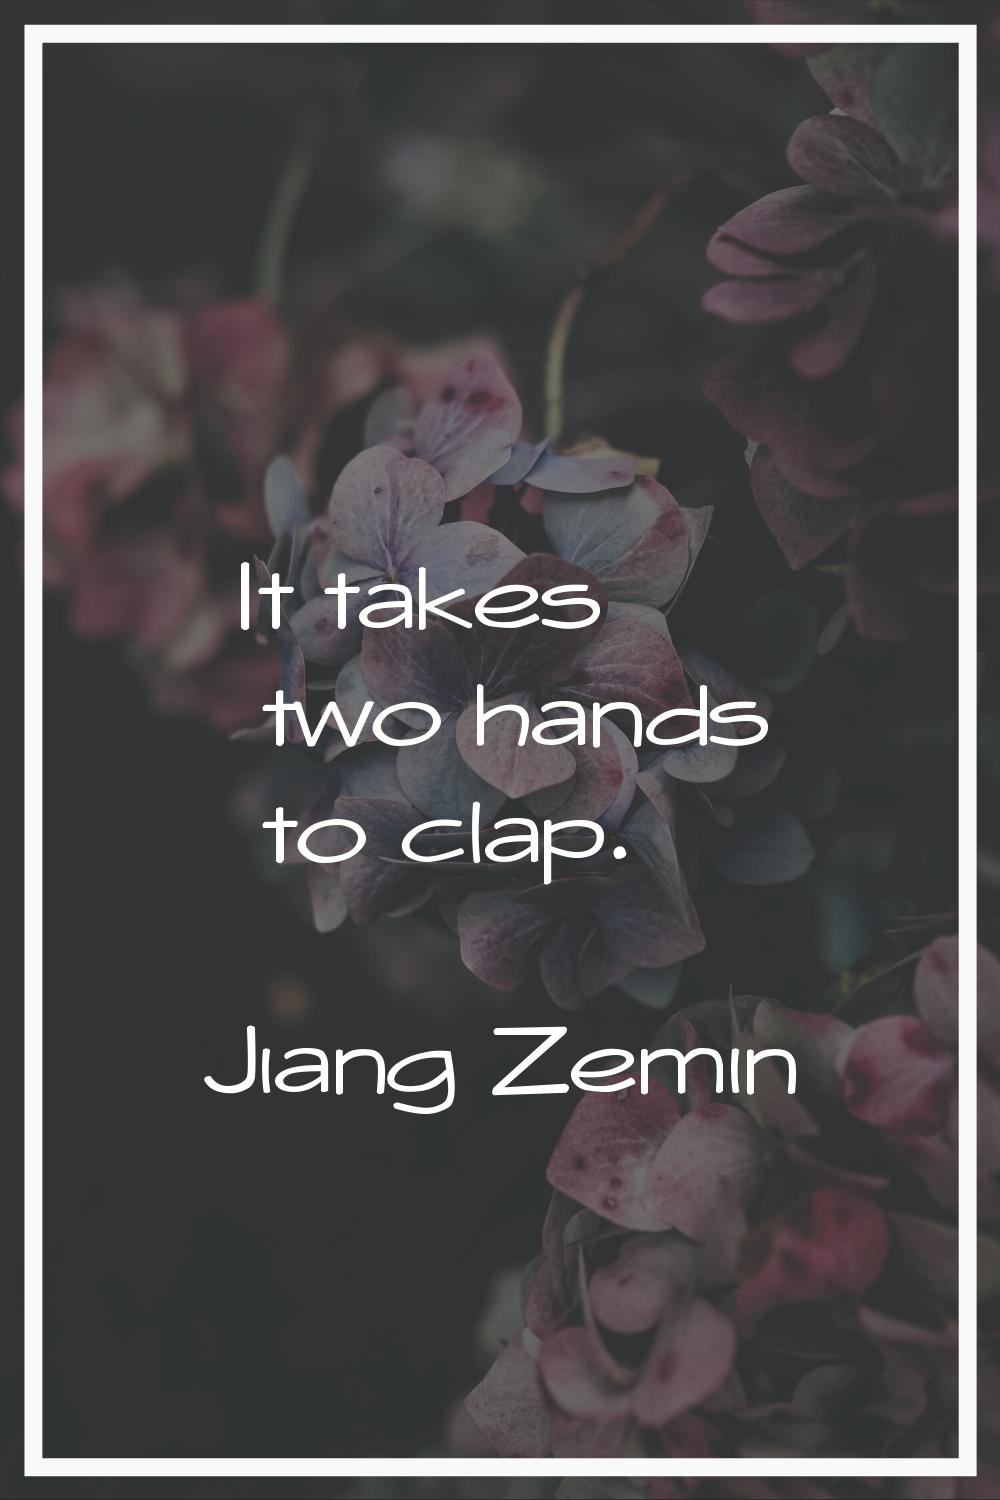 It takes two hands to clap.